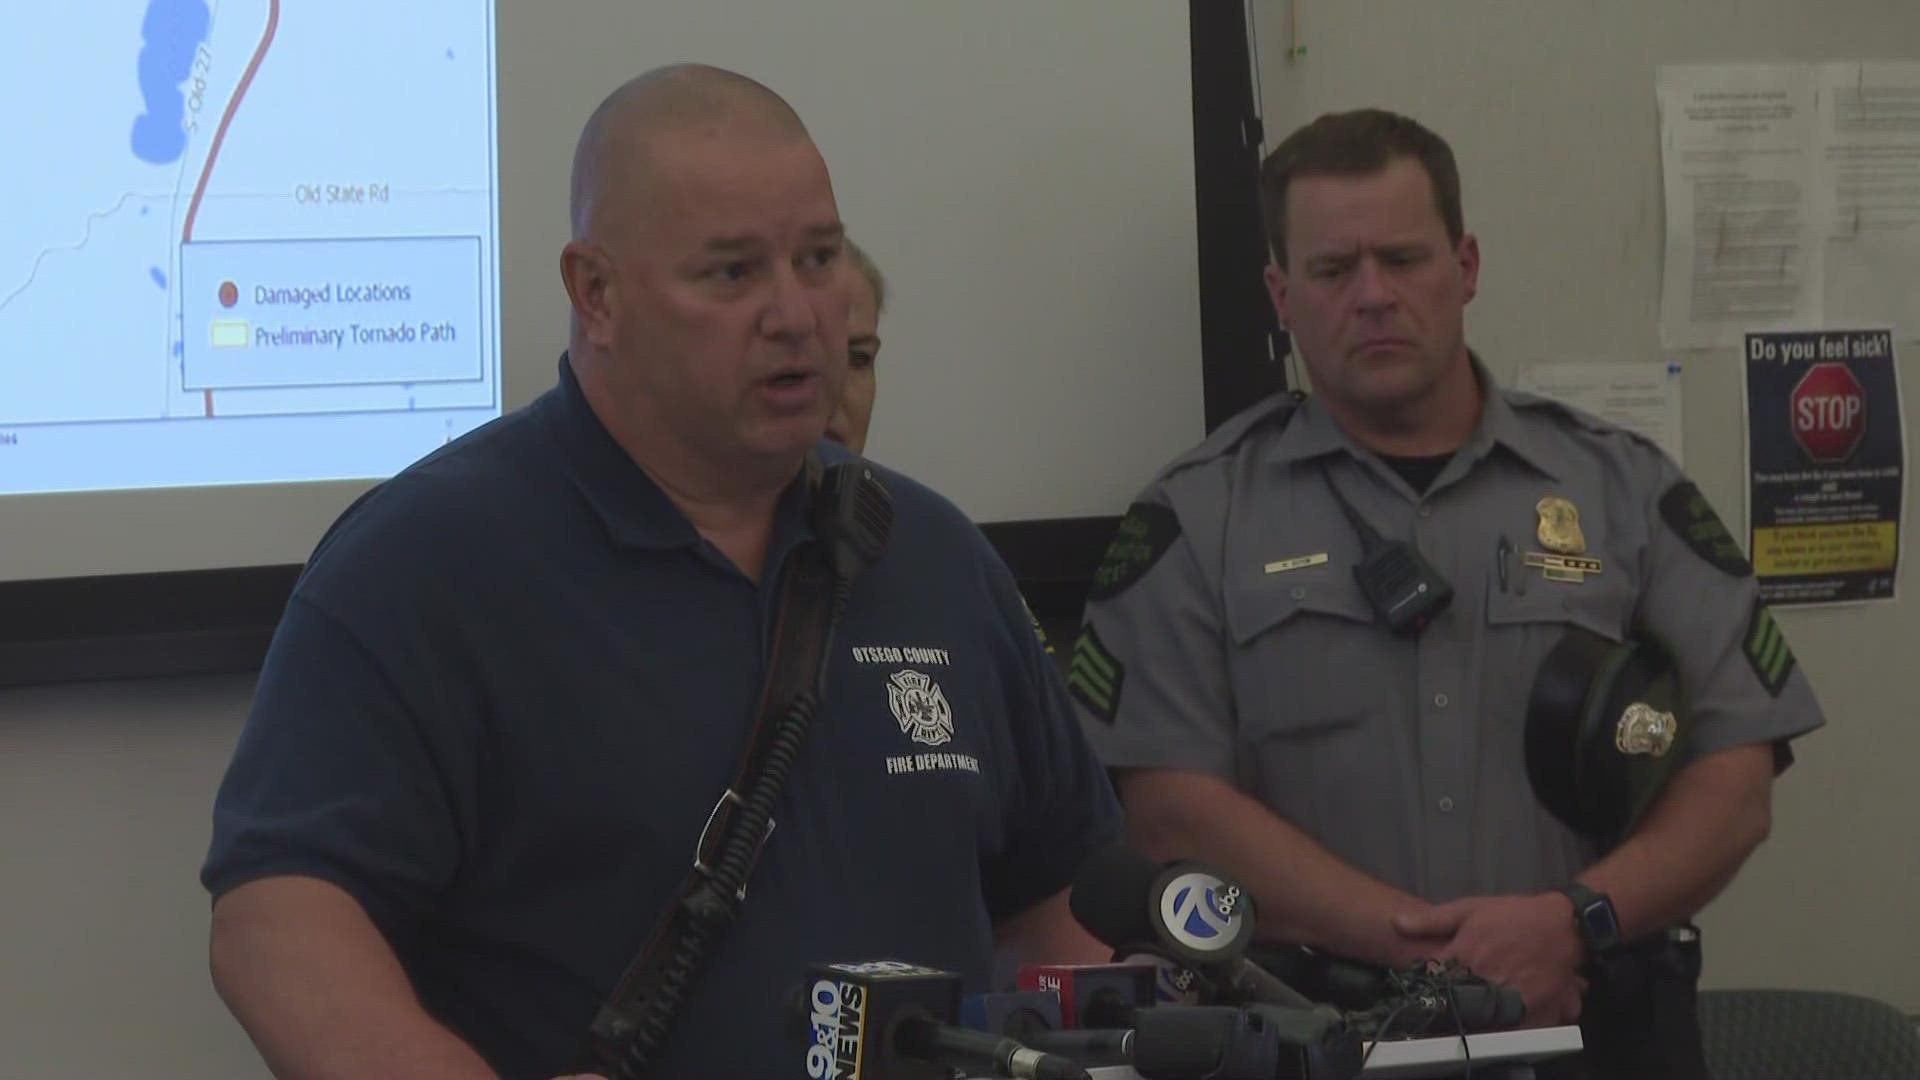 "Out of the mobile home park, there is probably 95 percent destruction in there," Otsego Fire Chief Chris Martin said as his crews continue work in Gaylord, Michigan